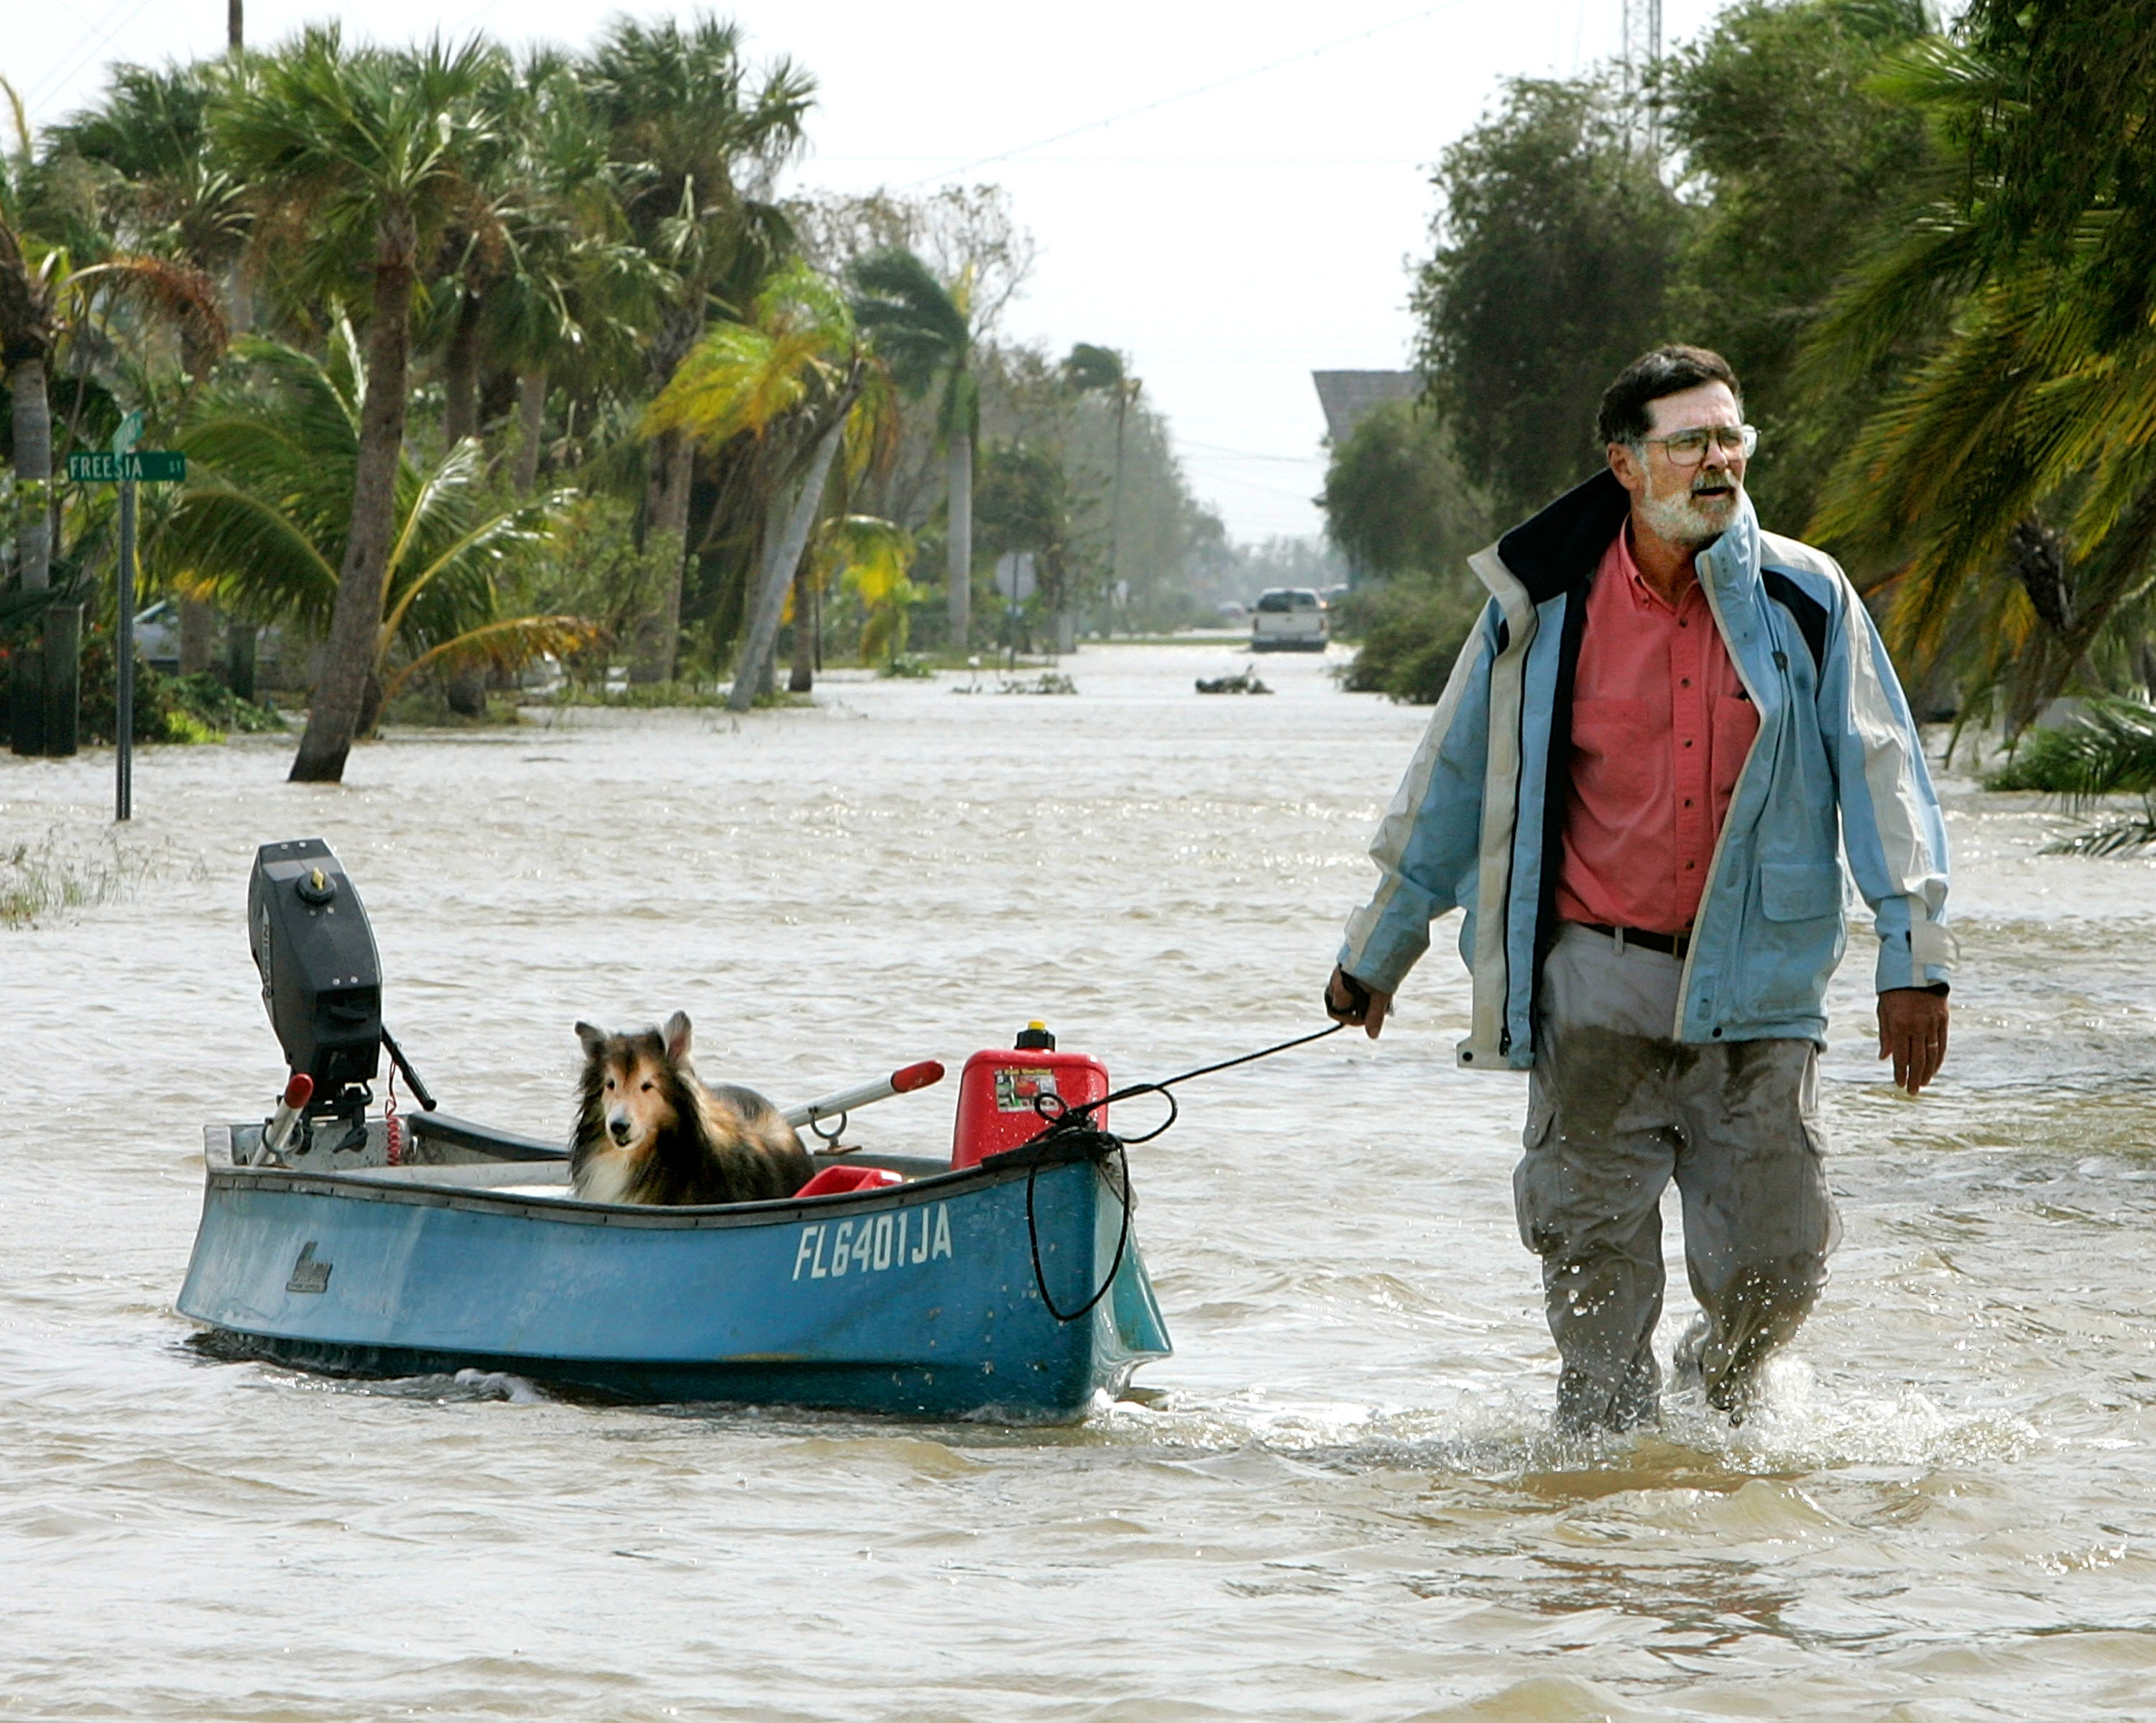 Steve Burke pulls his dog, Toby, down a flooded street in a canoe after Hurricane Wilma arrived this morning Oct. 24, 2005 in Everglades City, Florida. (Carlo Allegri—Getty Images)